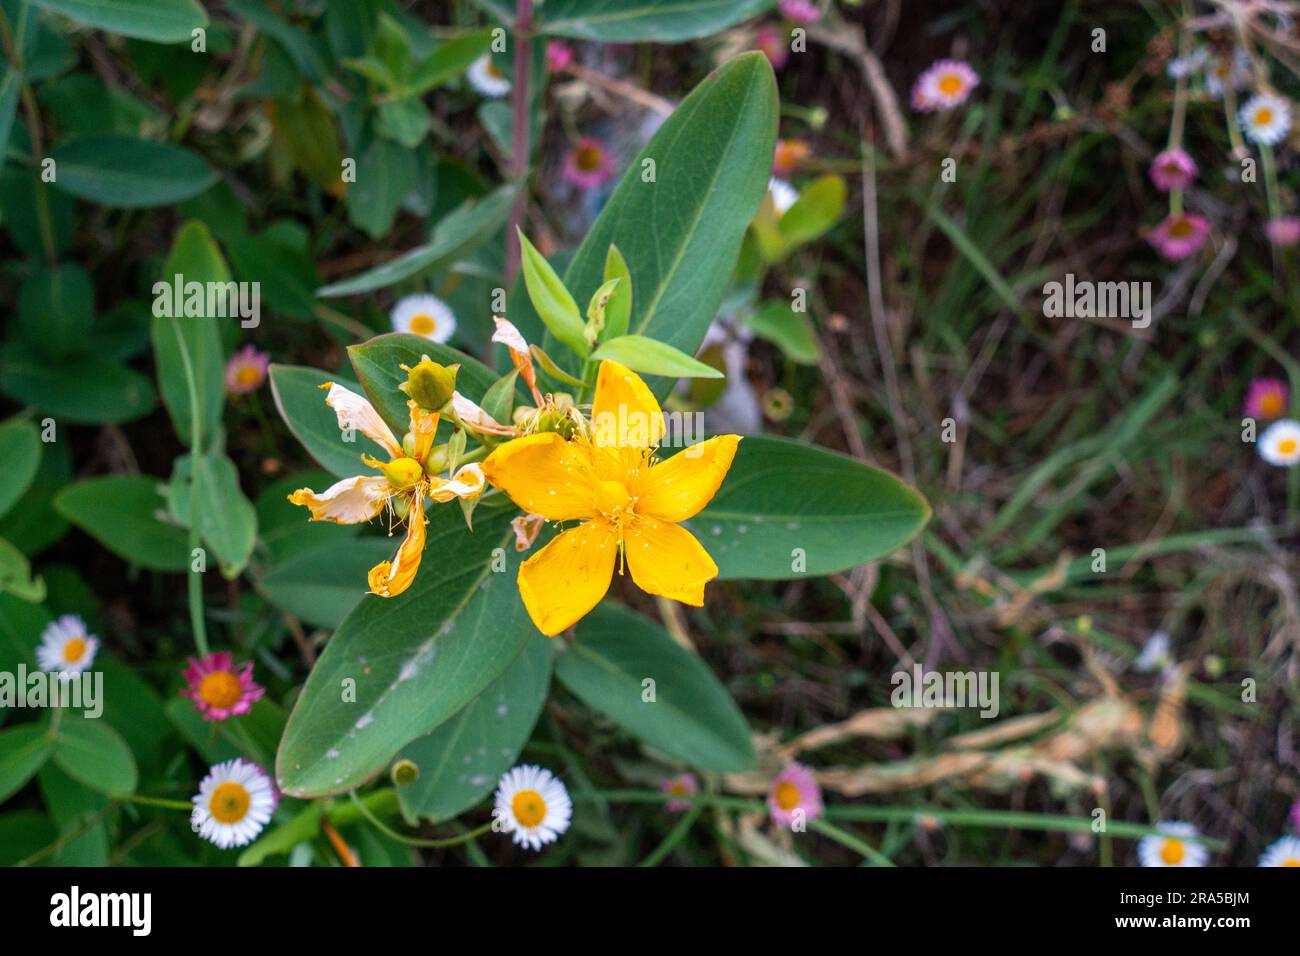 Blooming flowers of Hypericum foliosum plant. It is a species of flowering plant in the St. John's wort family Hypericaceae. Himalayan region of Uttar Stock Photo